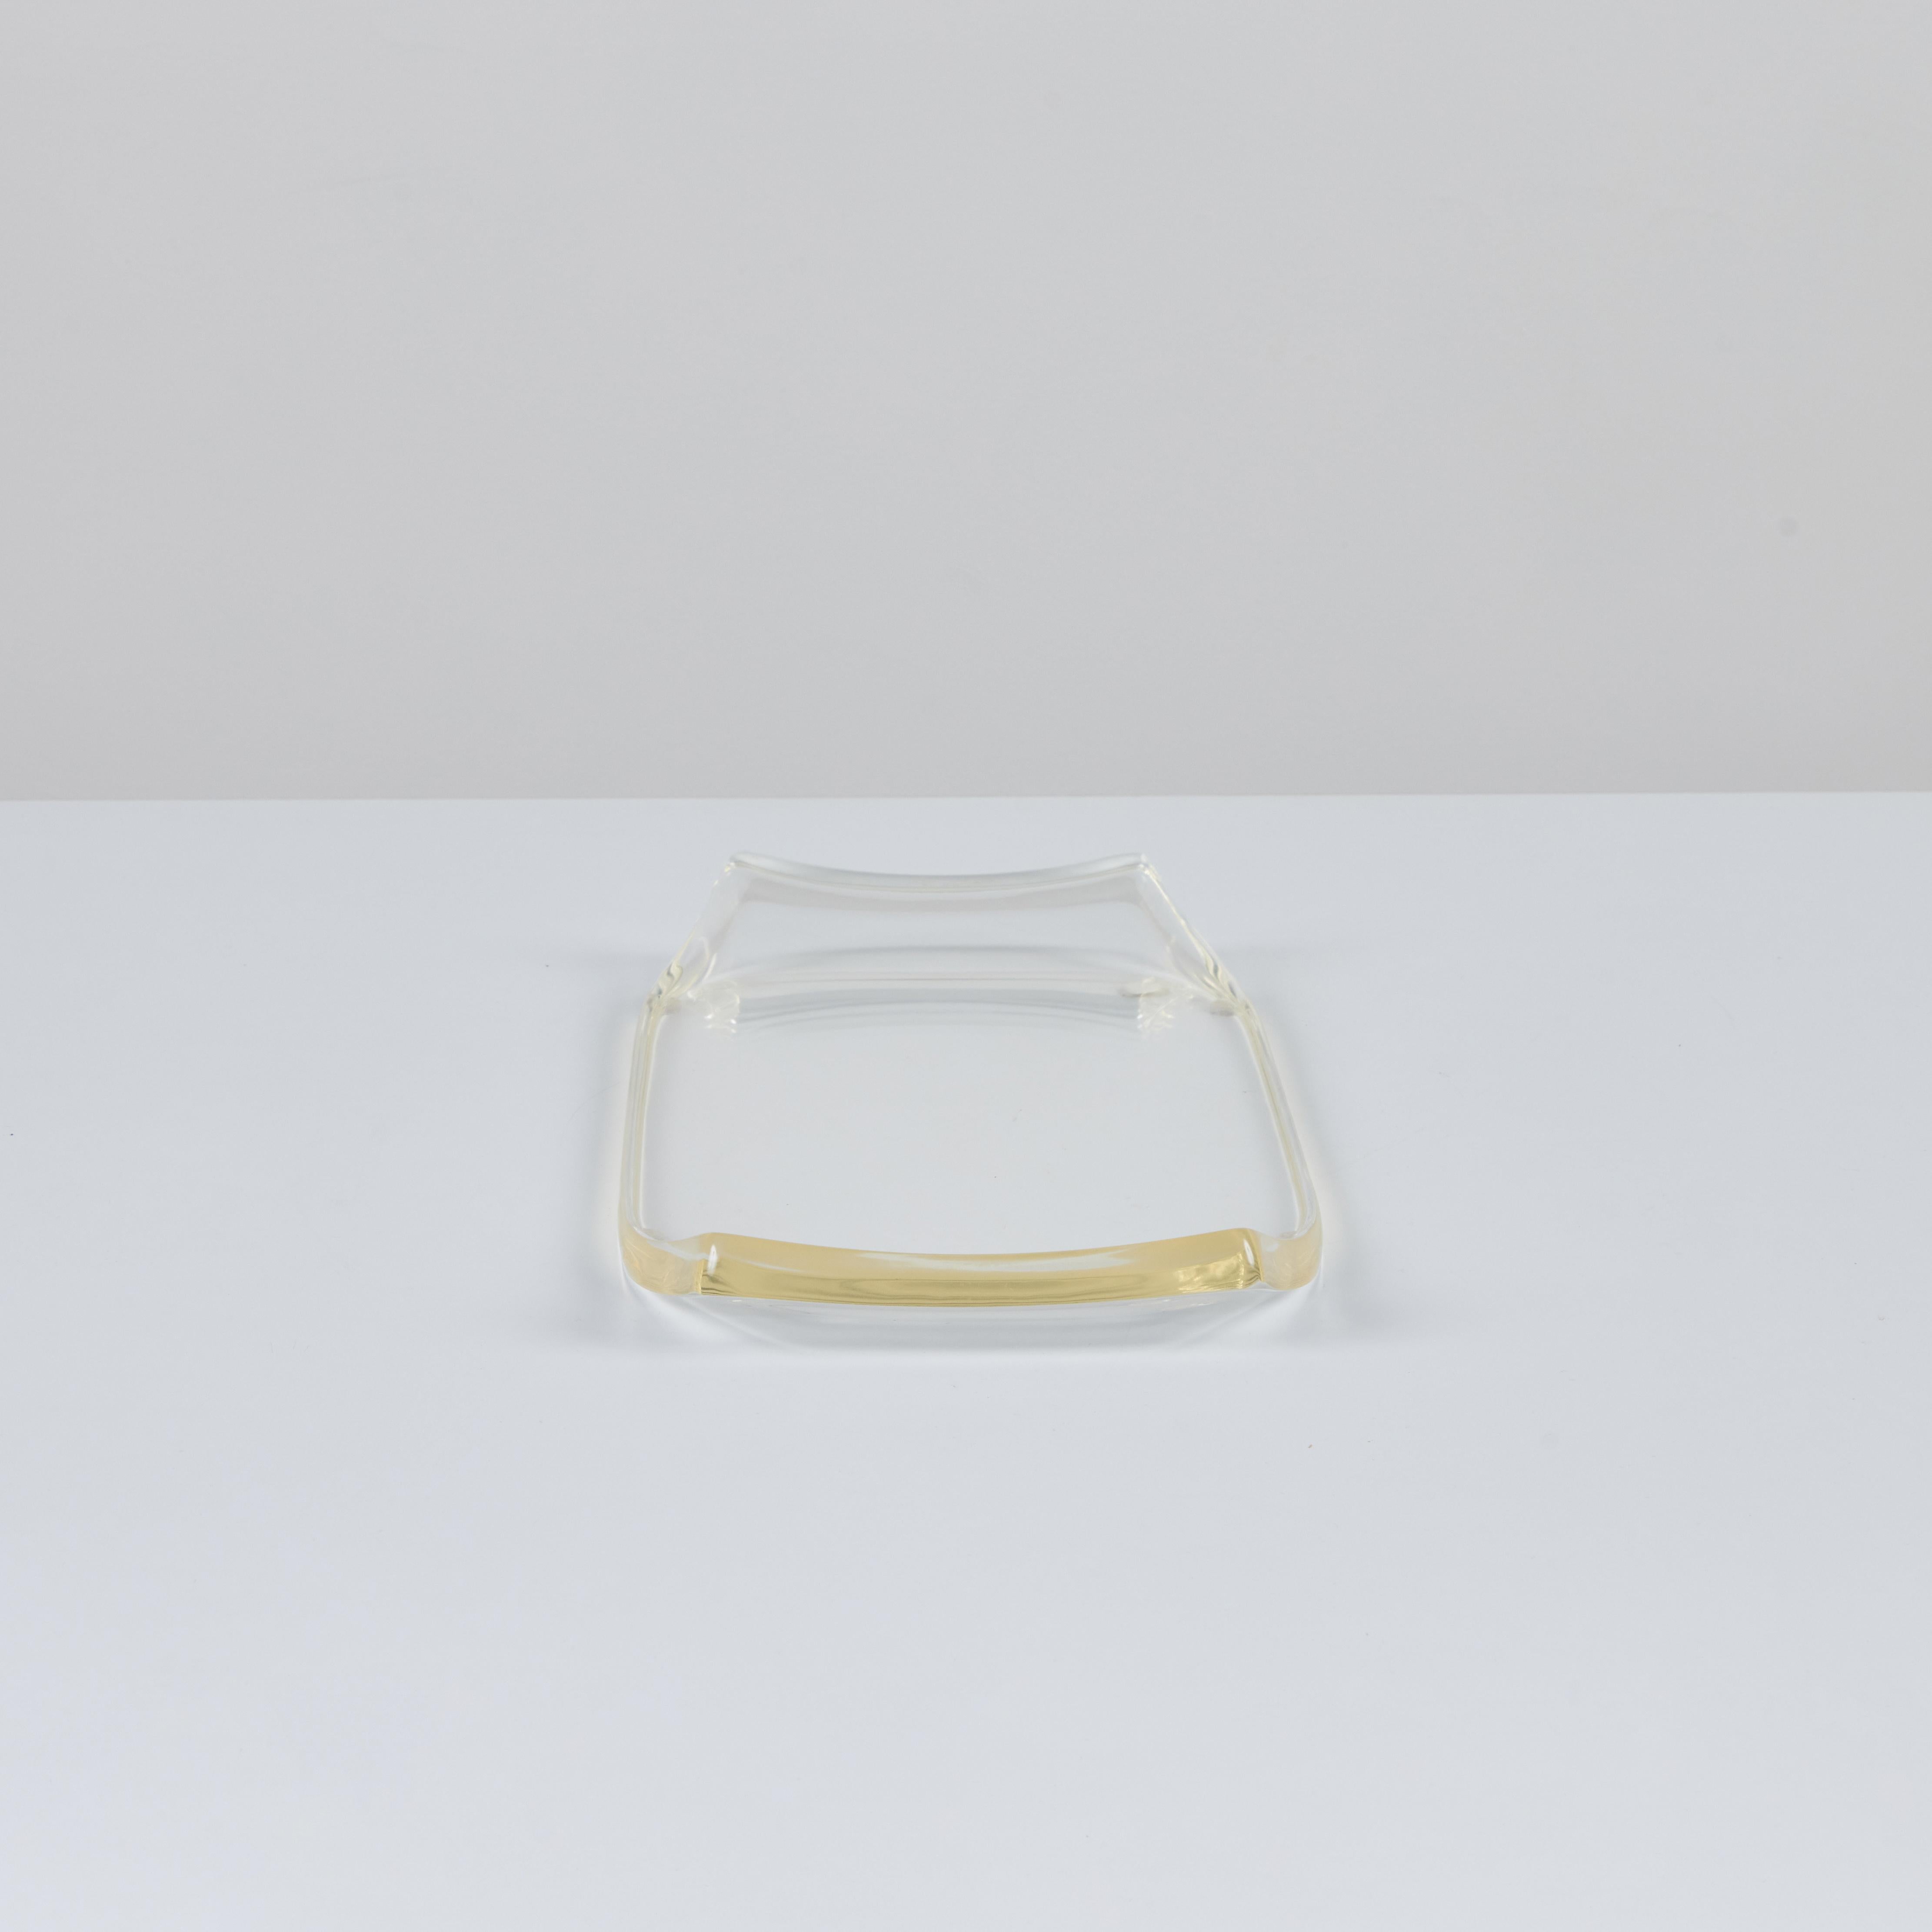 Late 20th Century Rectangular Lucite Tray by Ritts Co. For Sale